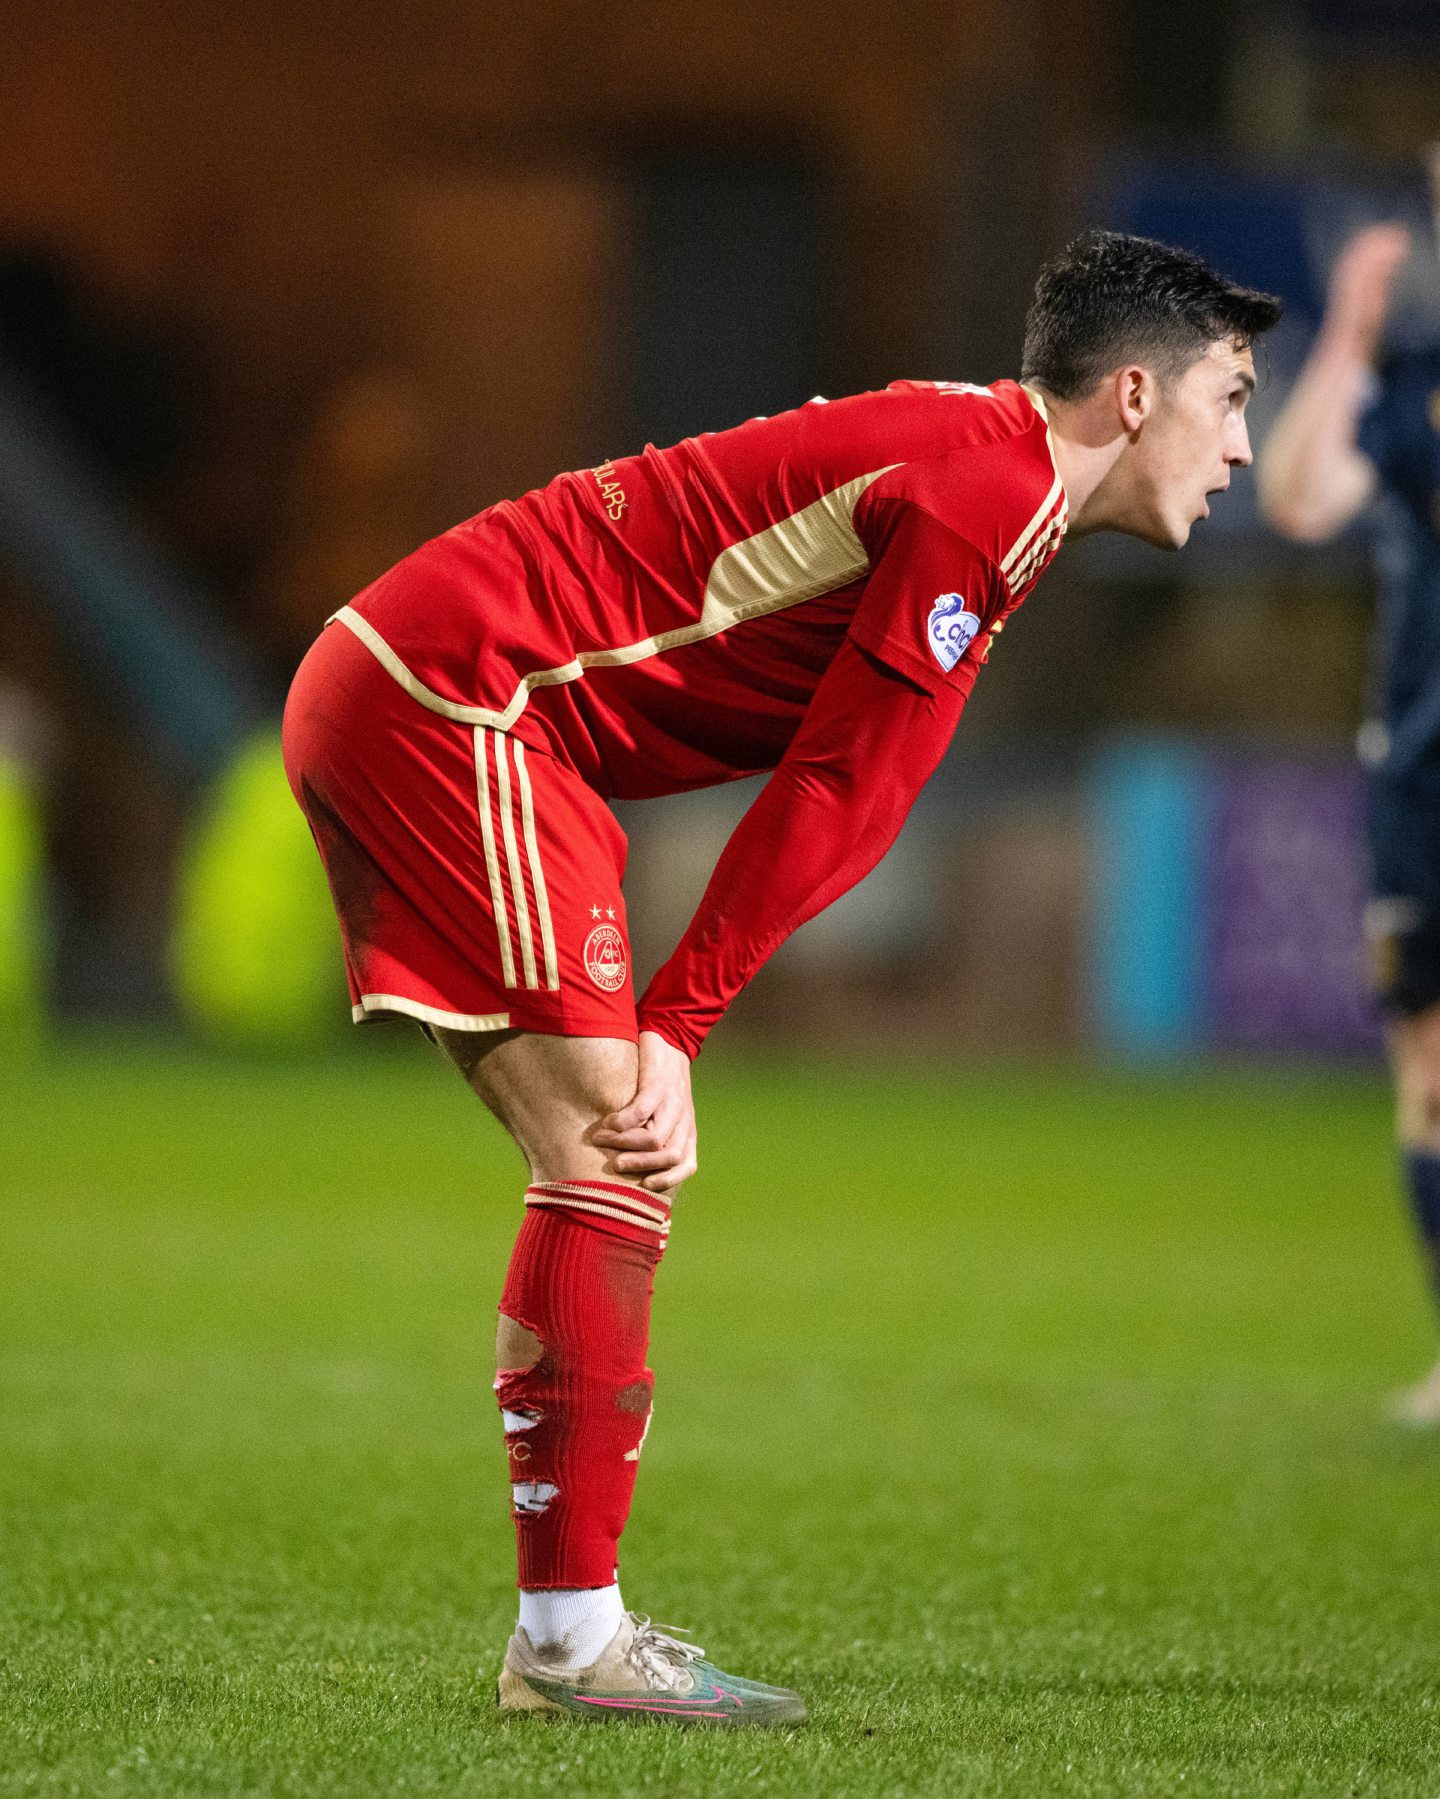 Aberdeen's Jamie McGrath looks dejected at full time after losing 1-0 at Dundee. Image: SNS